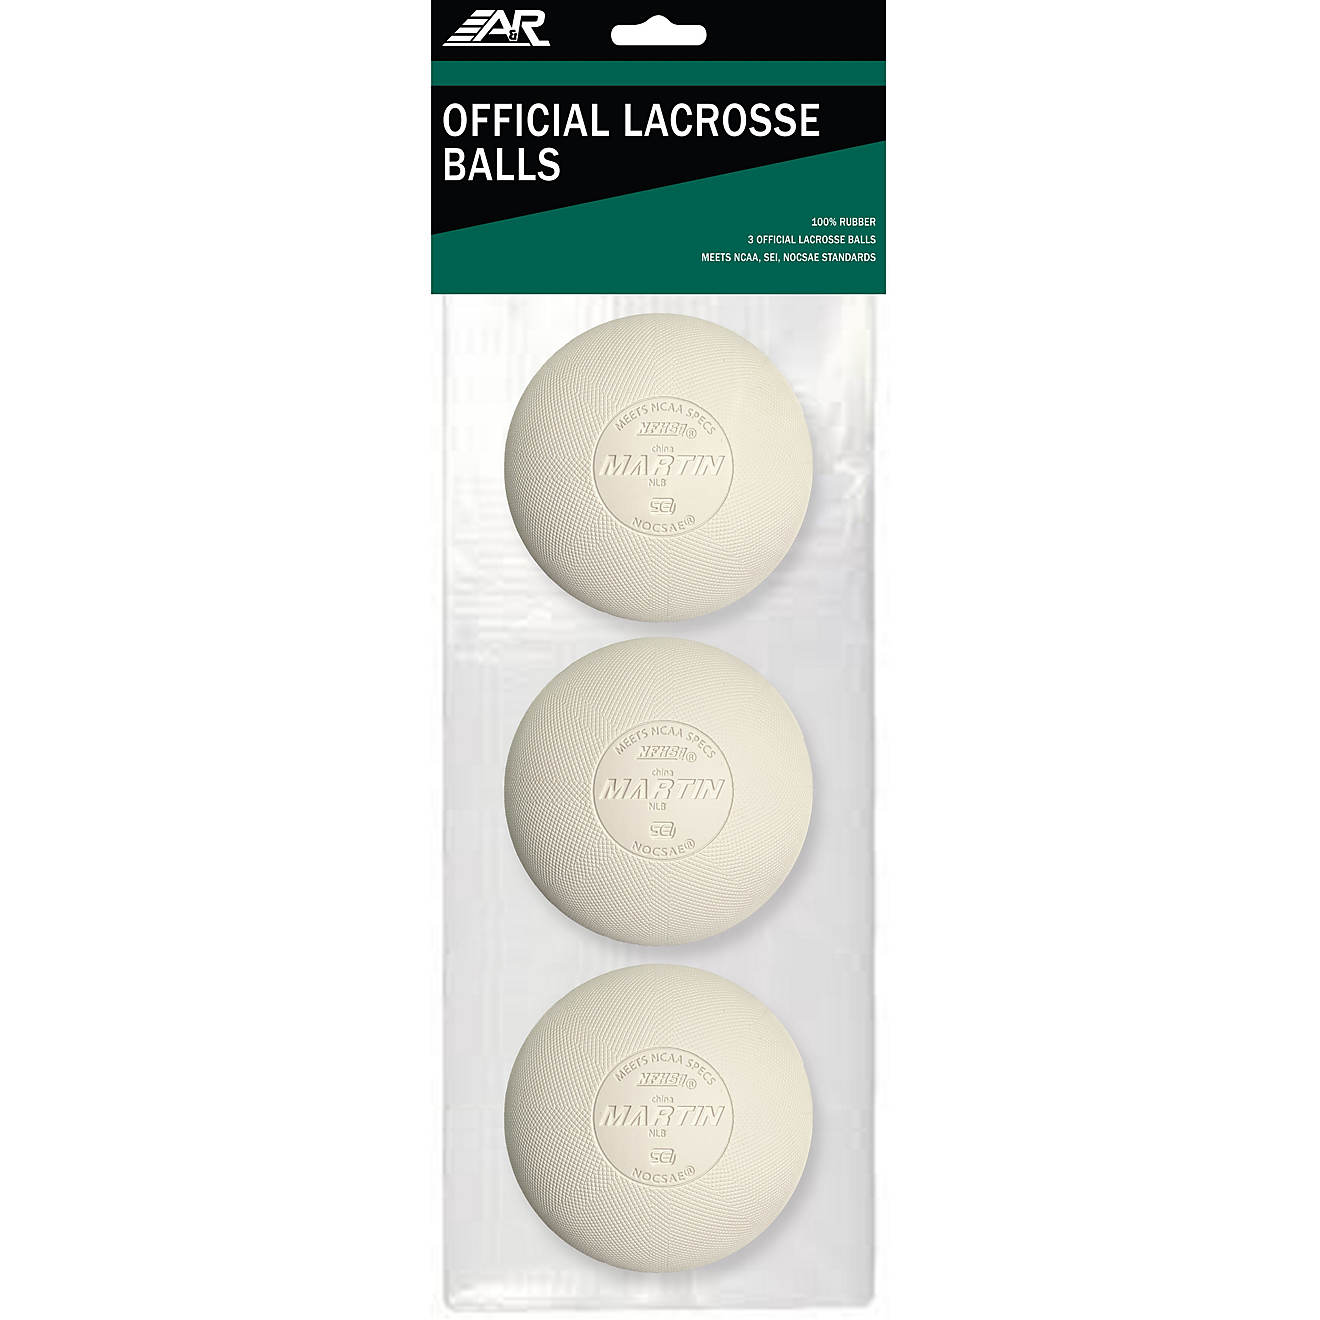 NFHS Martin Sports 2 Pack Official Lacrosse Balls WHITE NCAA NOCSAE Approved 